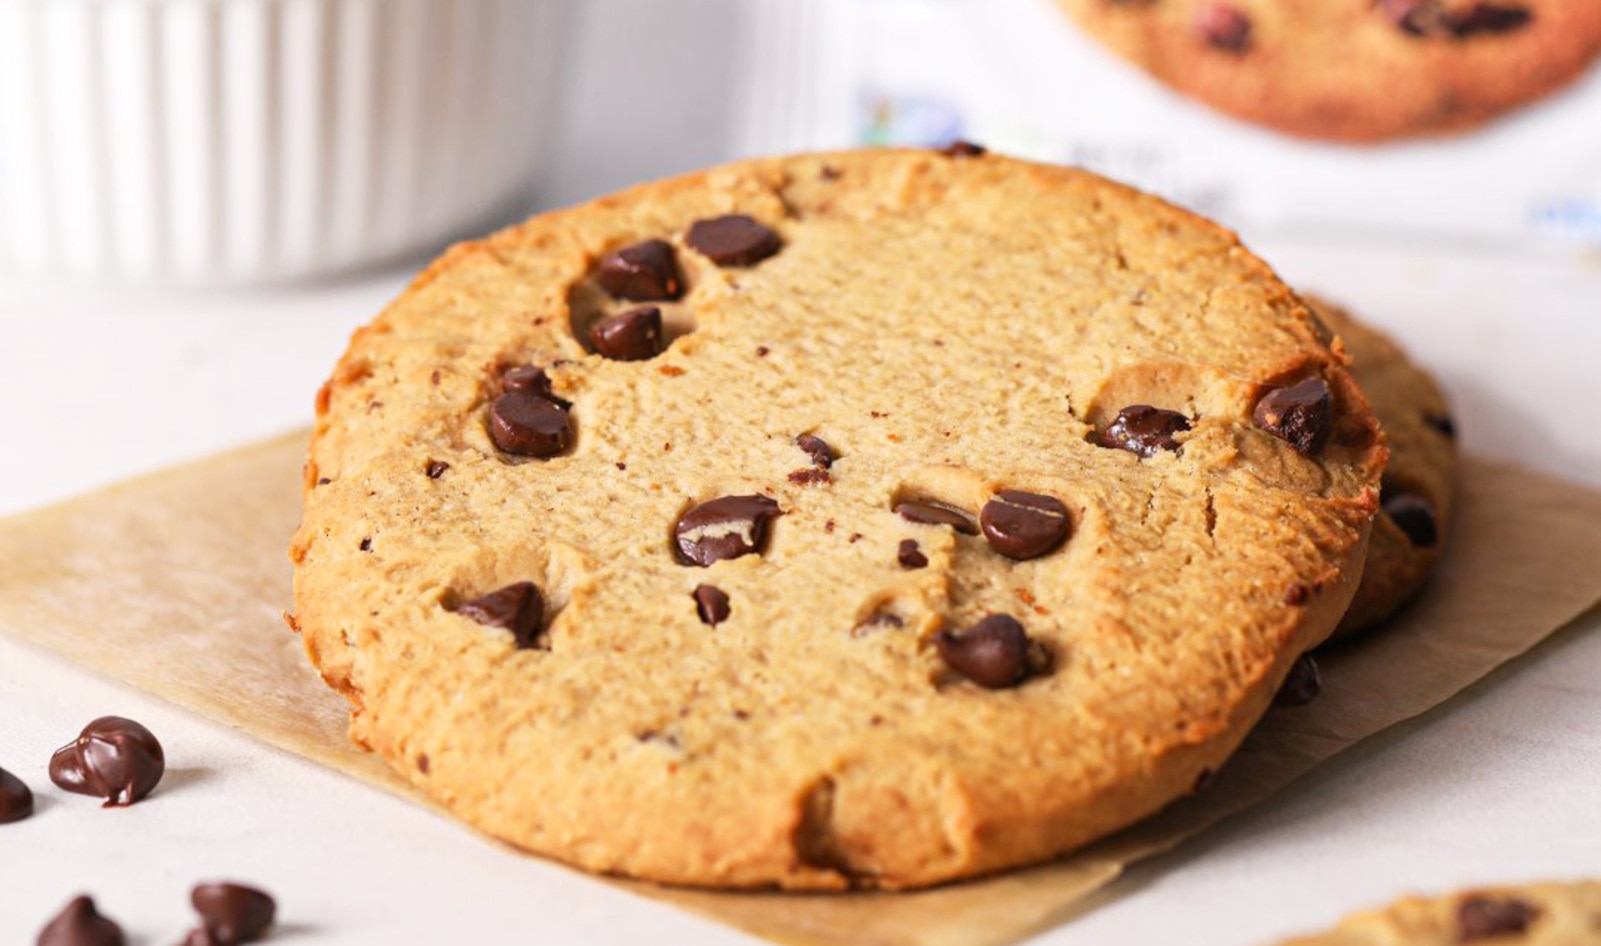 Vegan Brand Plans to Donate 50,000 Cookies to UPS Drivers